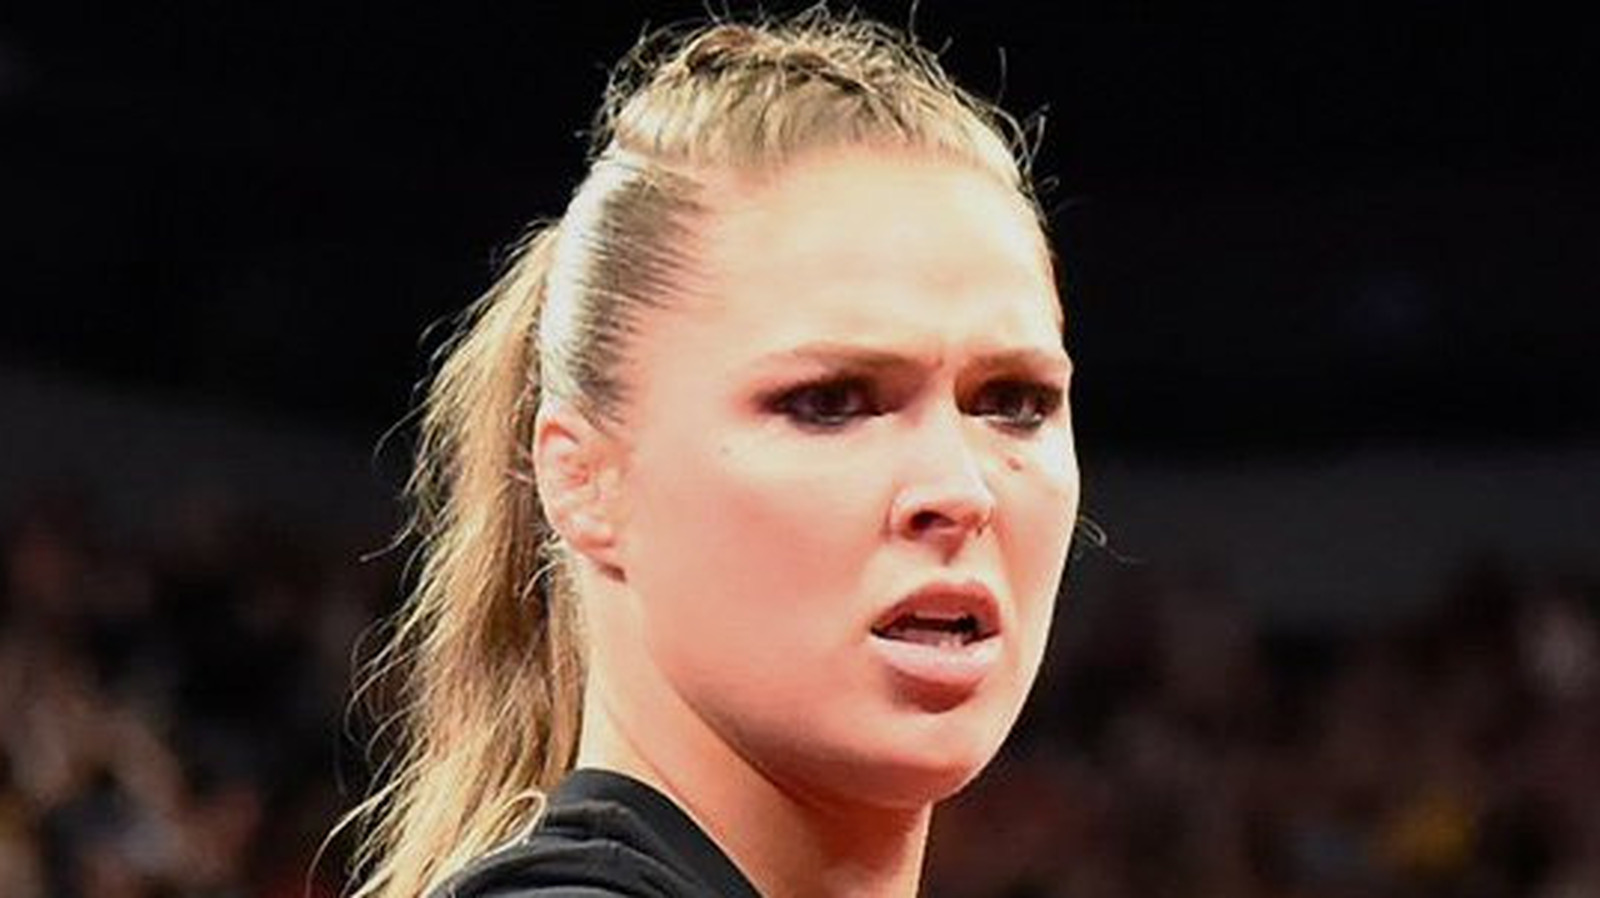 Backstage Update On Ronda Rousey's Royal Rumble Status